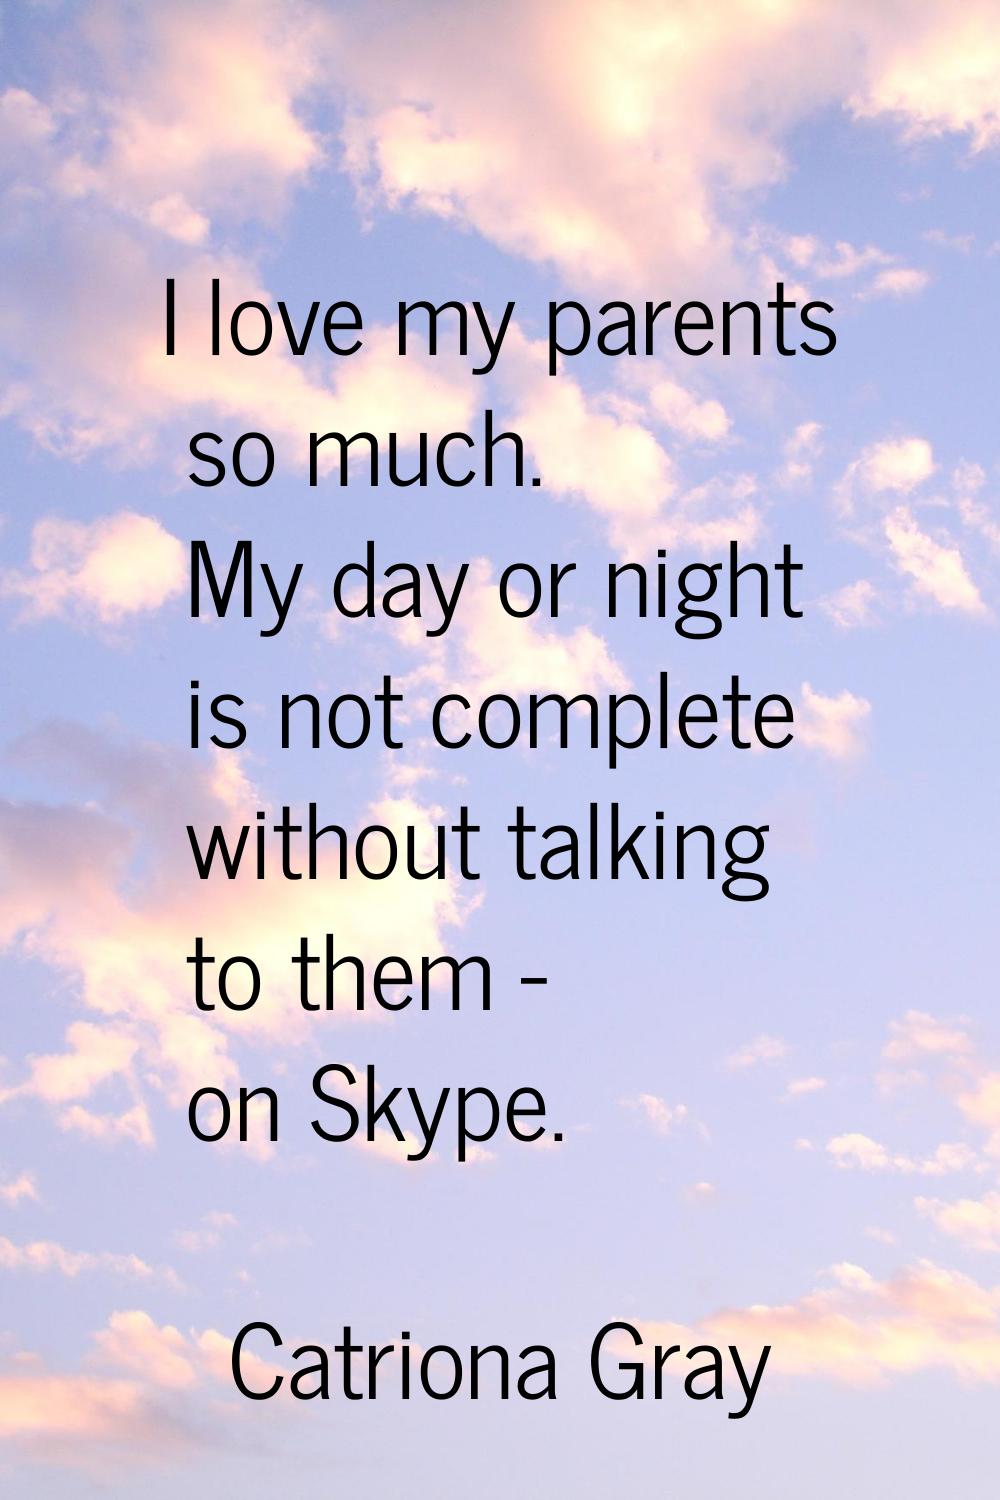 I love my parents so much. My day or night is not complete without talking to them - on Skype.